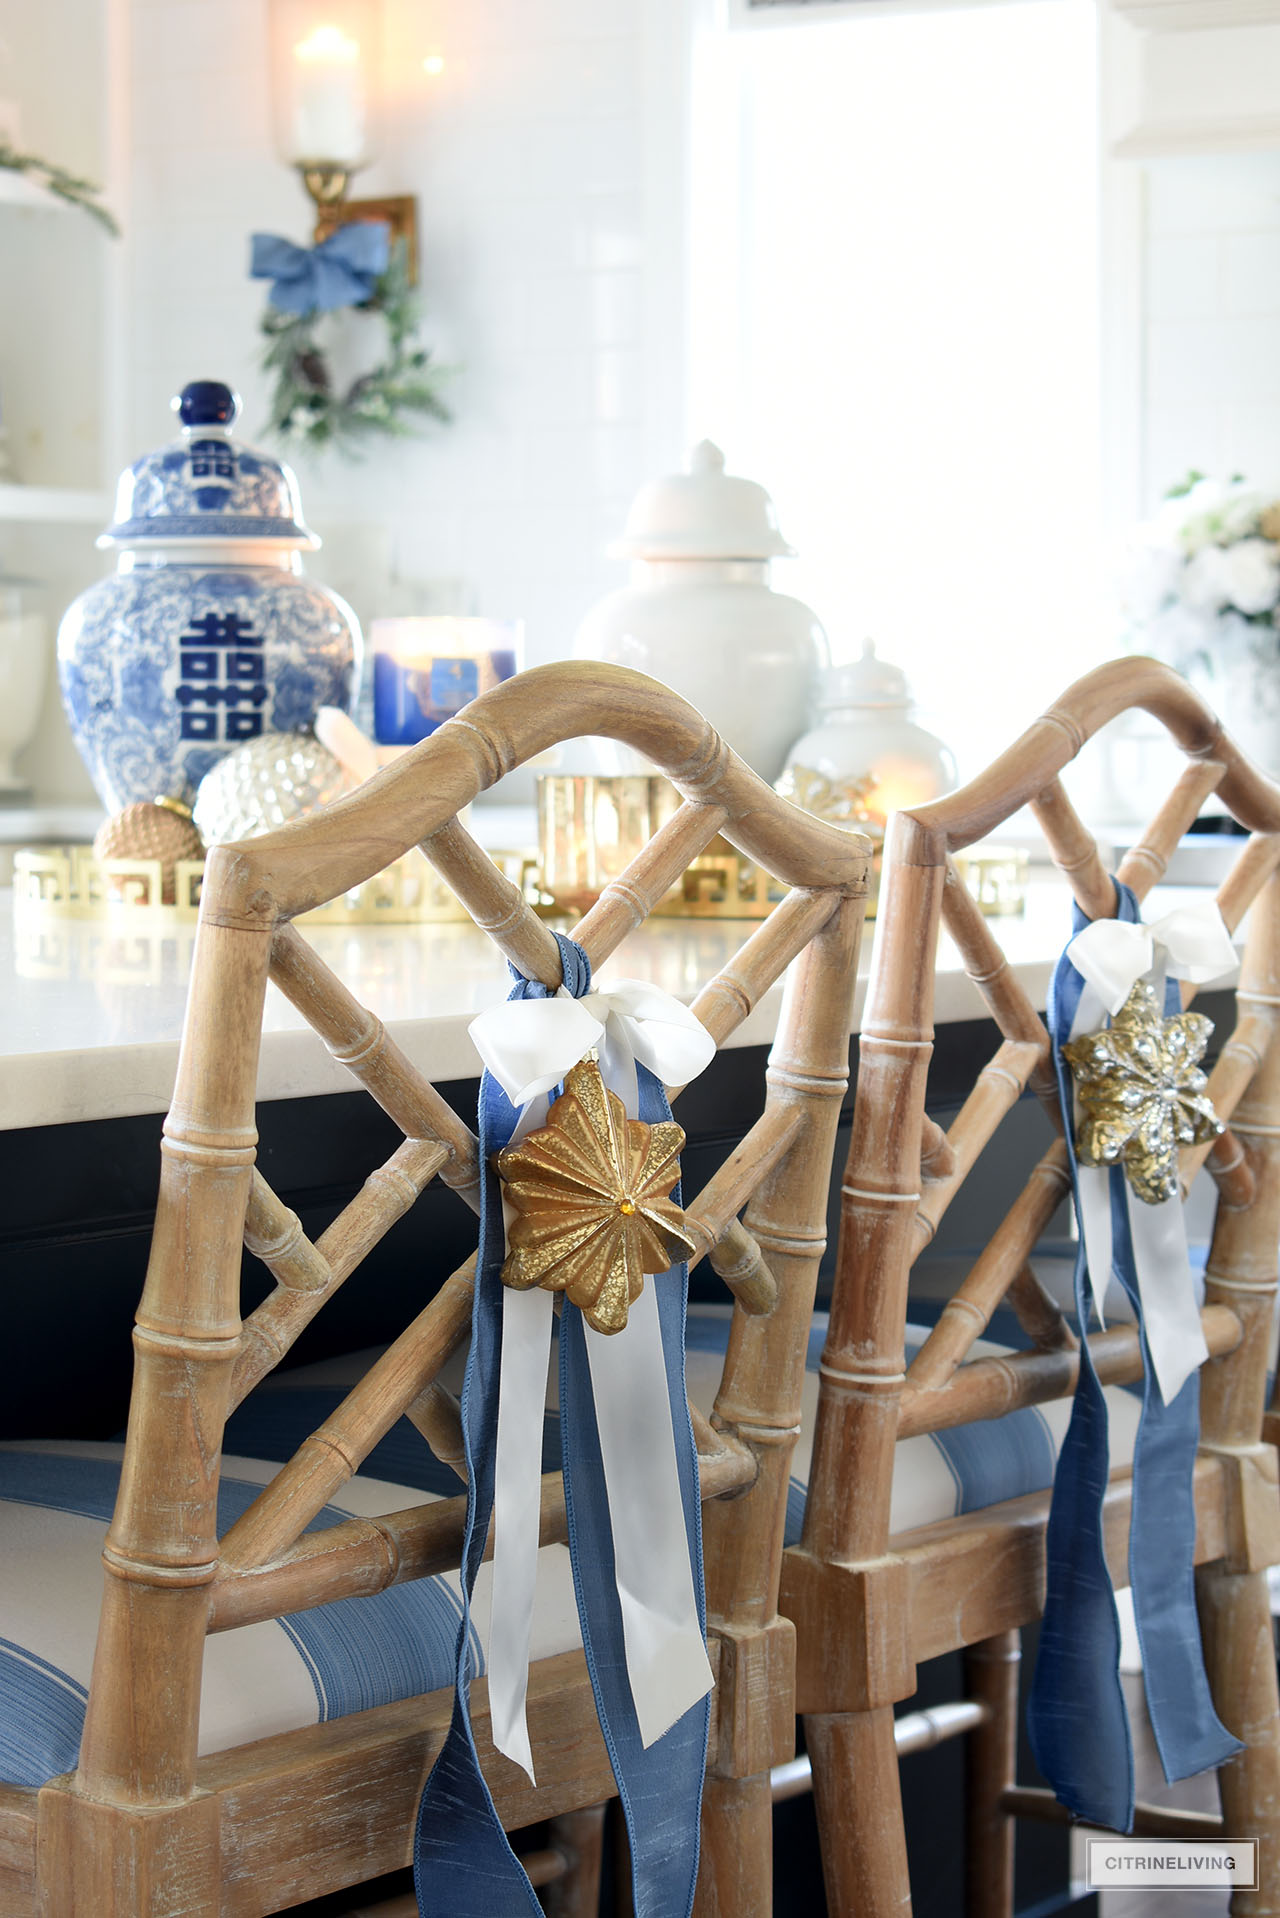 Chinese Chippendale barstools with blue and white striped fabric seats are decorated for Christmas with blue and white ribbon and hanging ornaments.